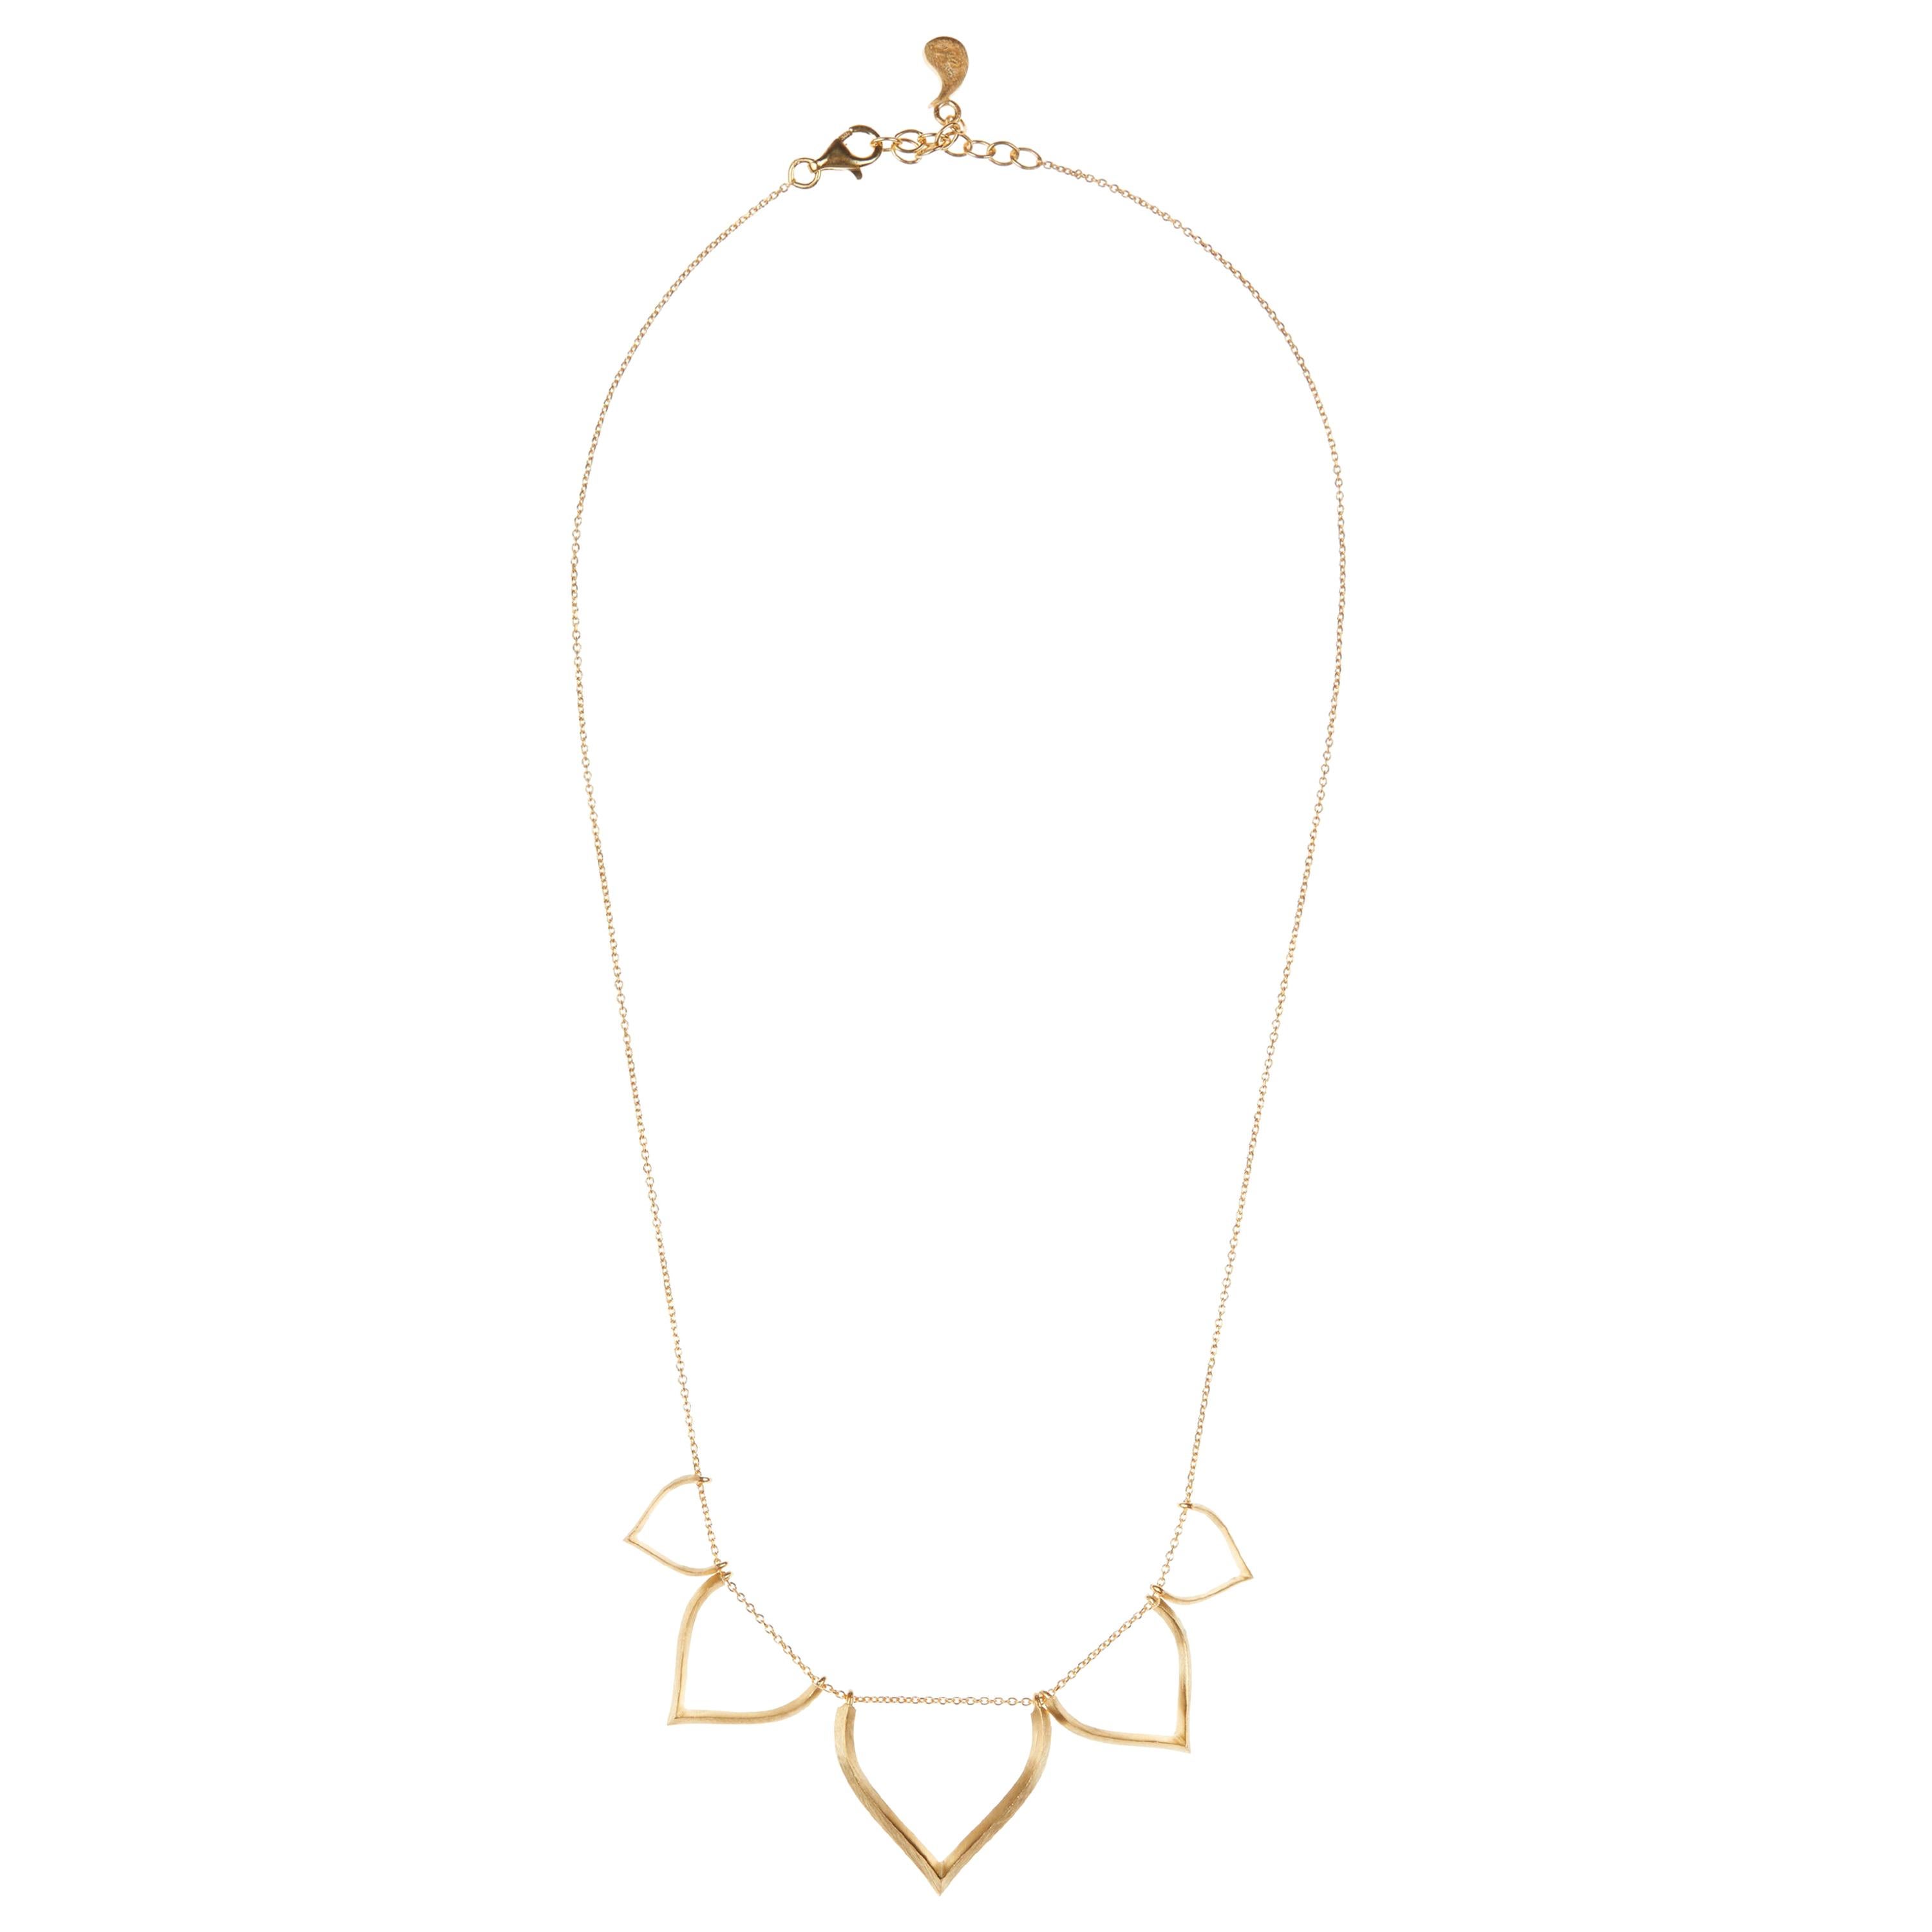 Necklace Chain Classic 18K Gold-Plated Sterling Silver Lotus Shaped Motif Greek For Sale